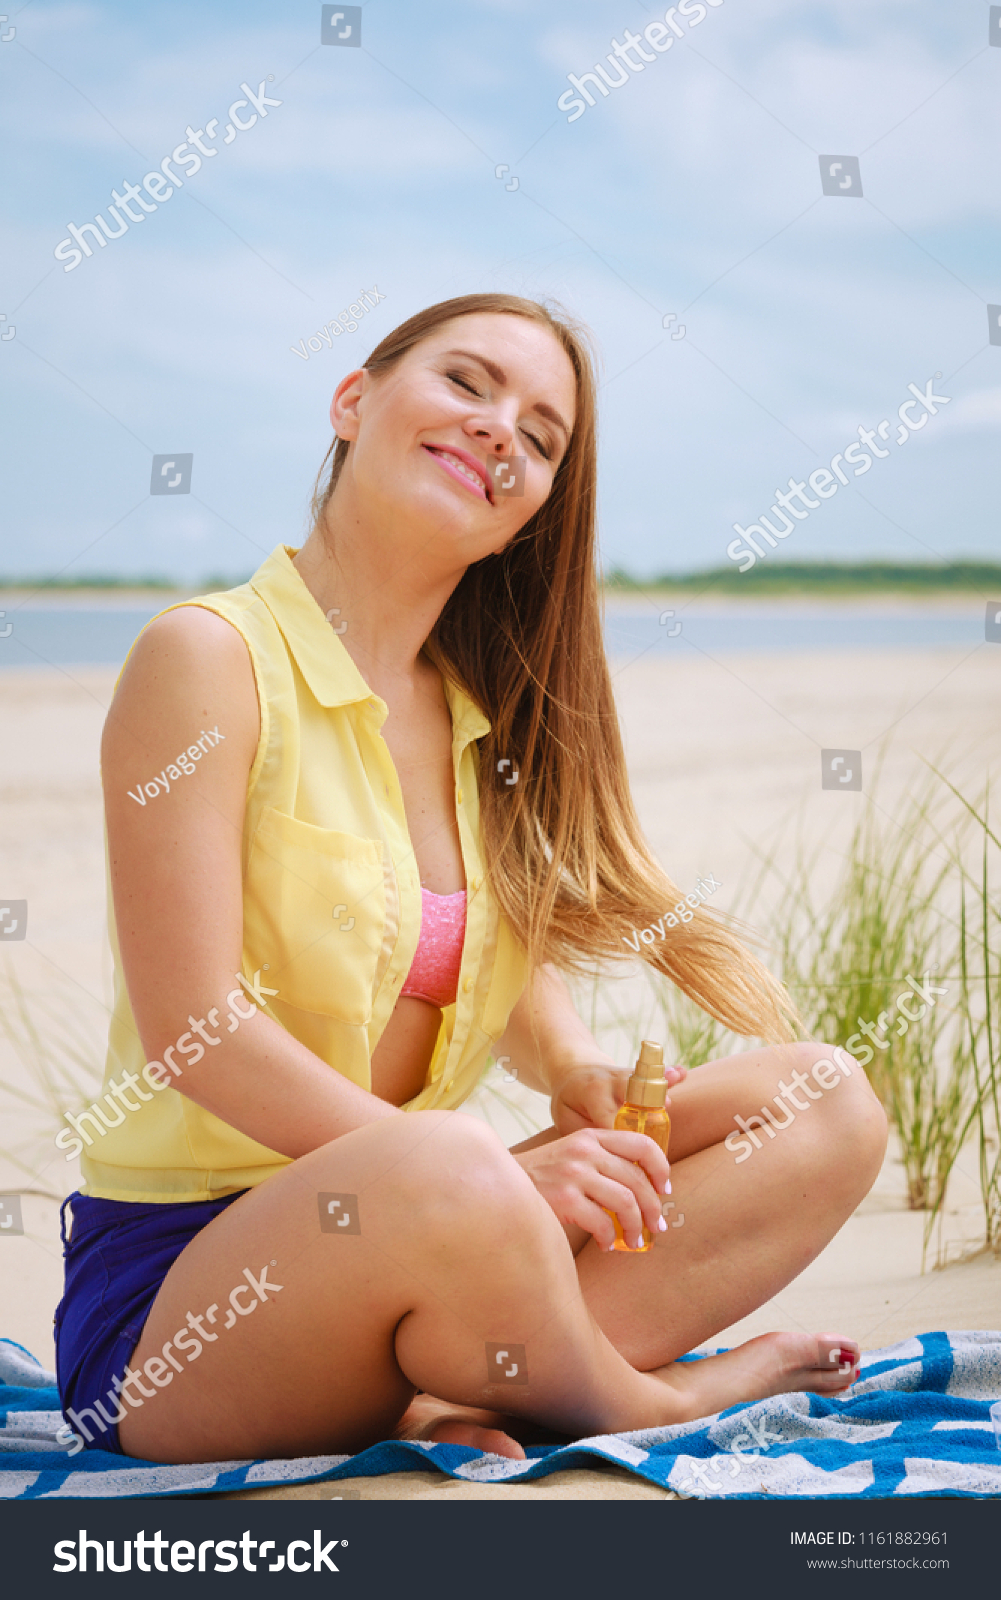 Skin protection in summer. Woman on beach using sun oil. Young beauty girl taking sunbath on sunny day. Holidays time. #1161882961